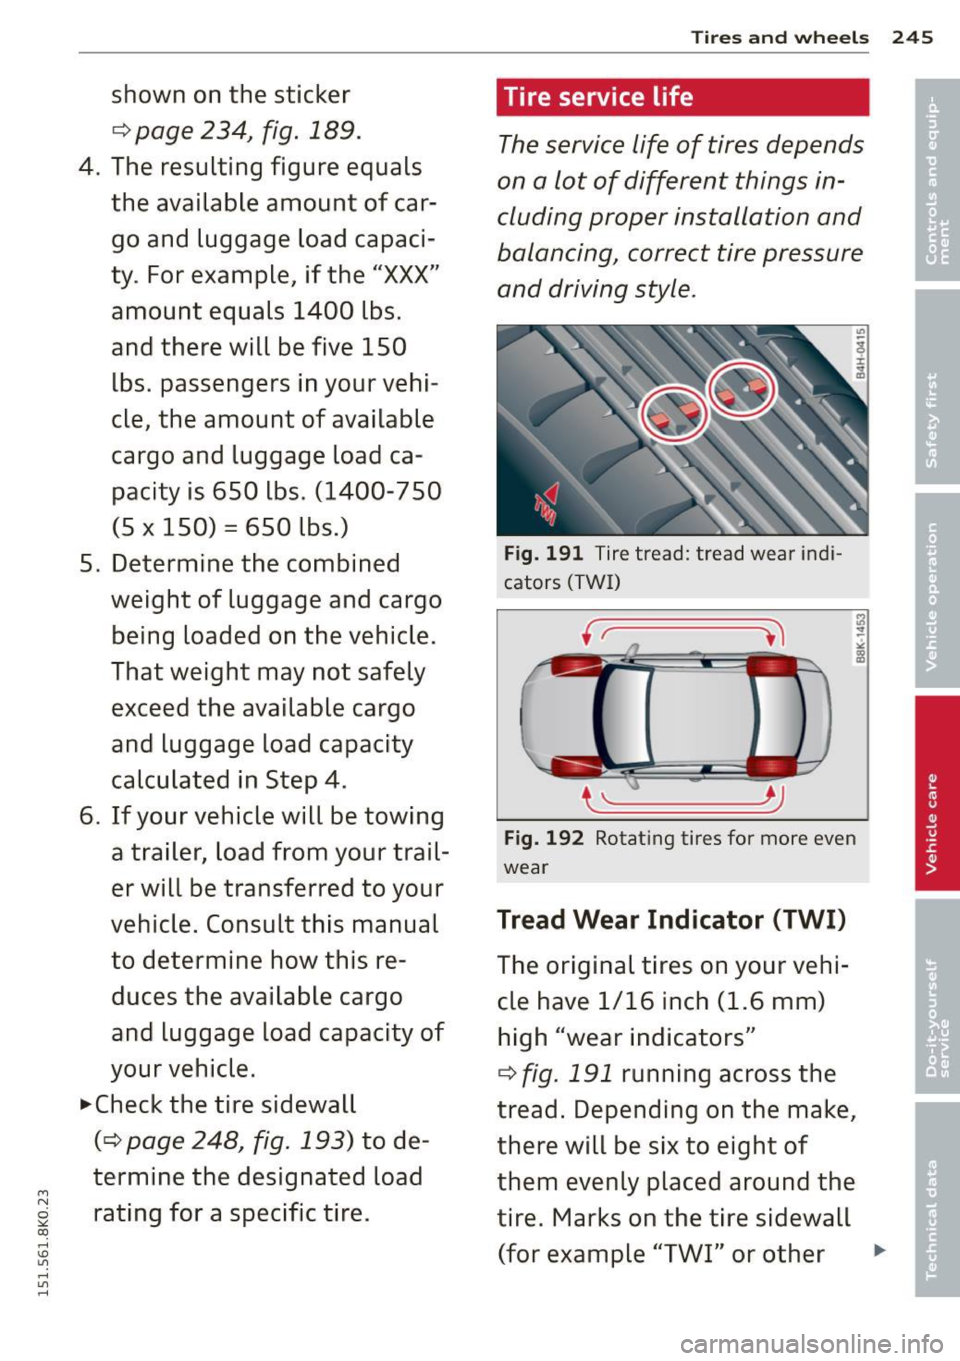 AUDI S4 2015  Owners Manual M N 
~ co 
rl I.O 
" rl 
" rl 
shown  on the sticker 
c=> page  234,  fig.  189. 
4. The  resulting  figure  equals 
the  available  amount  of car­ go and  luggage  load  capaci­
ty.  For example